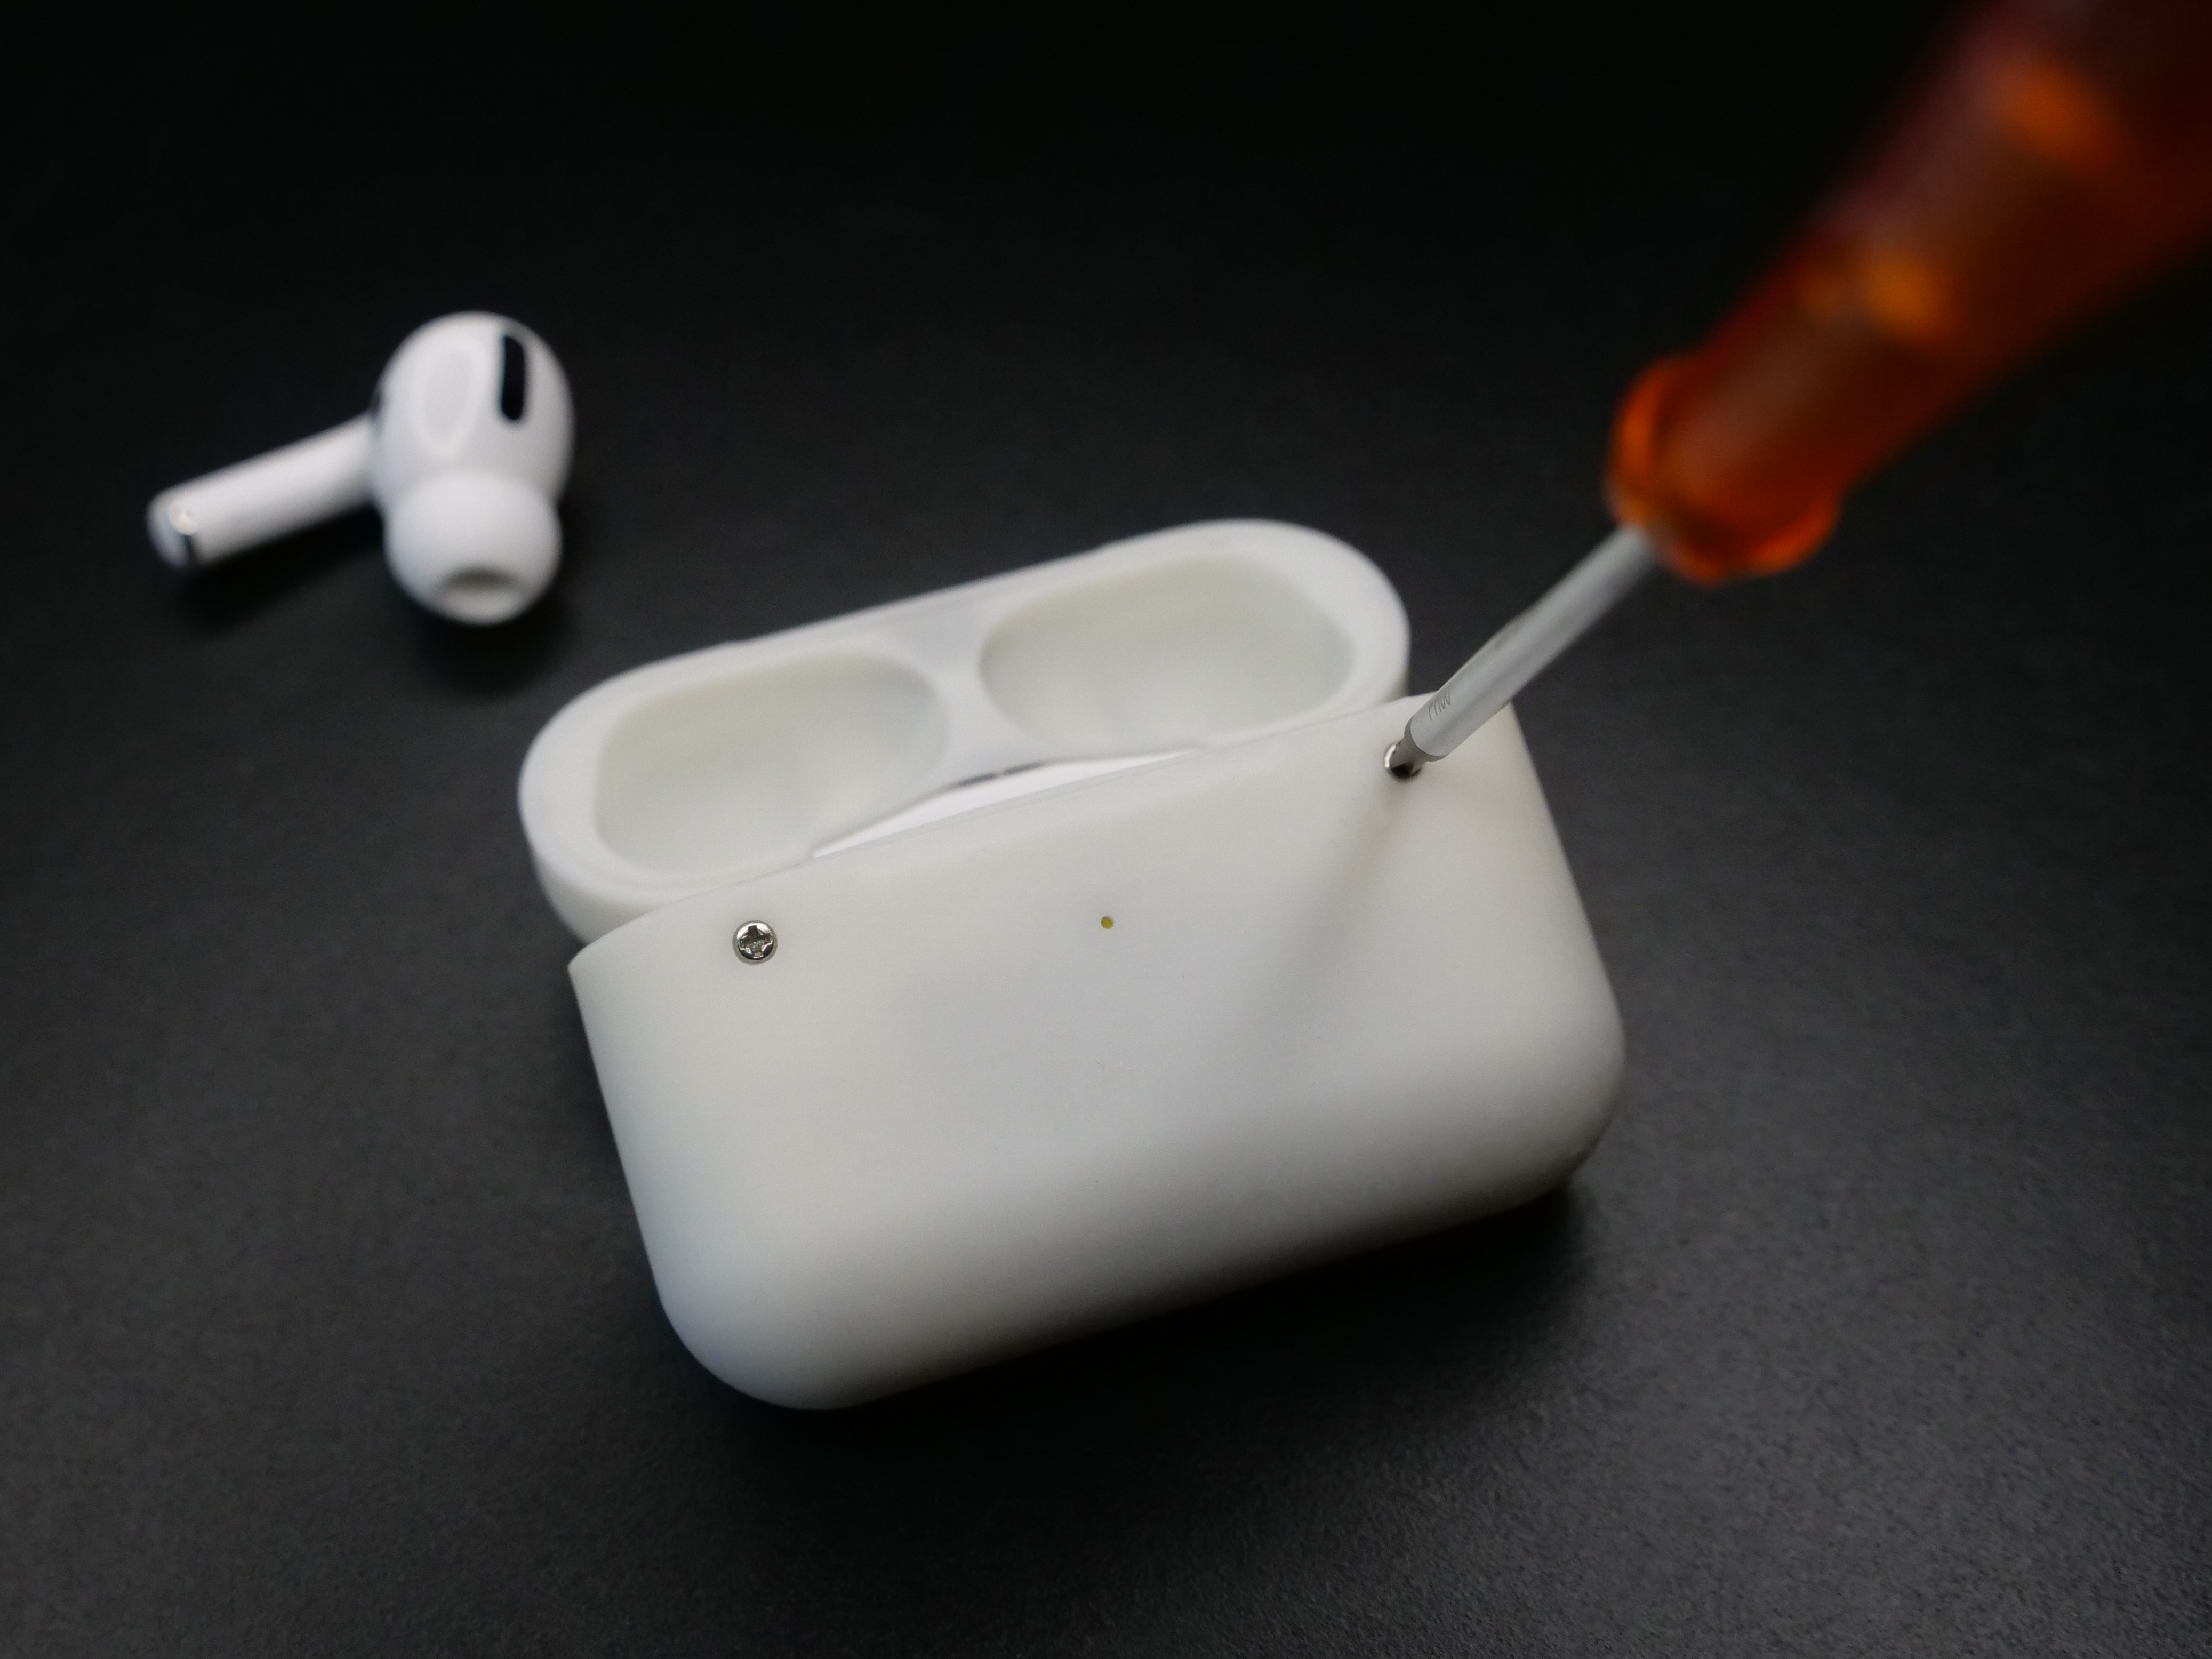 Repairable AirPods Pro